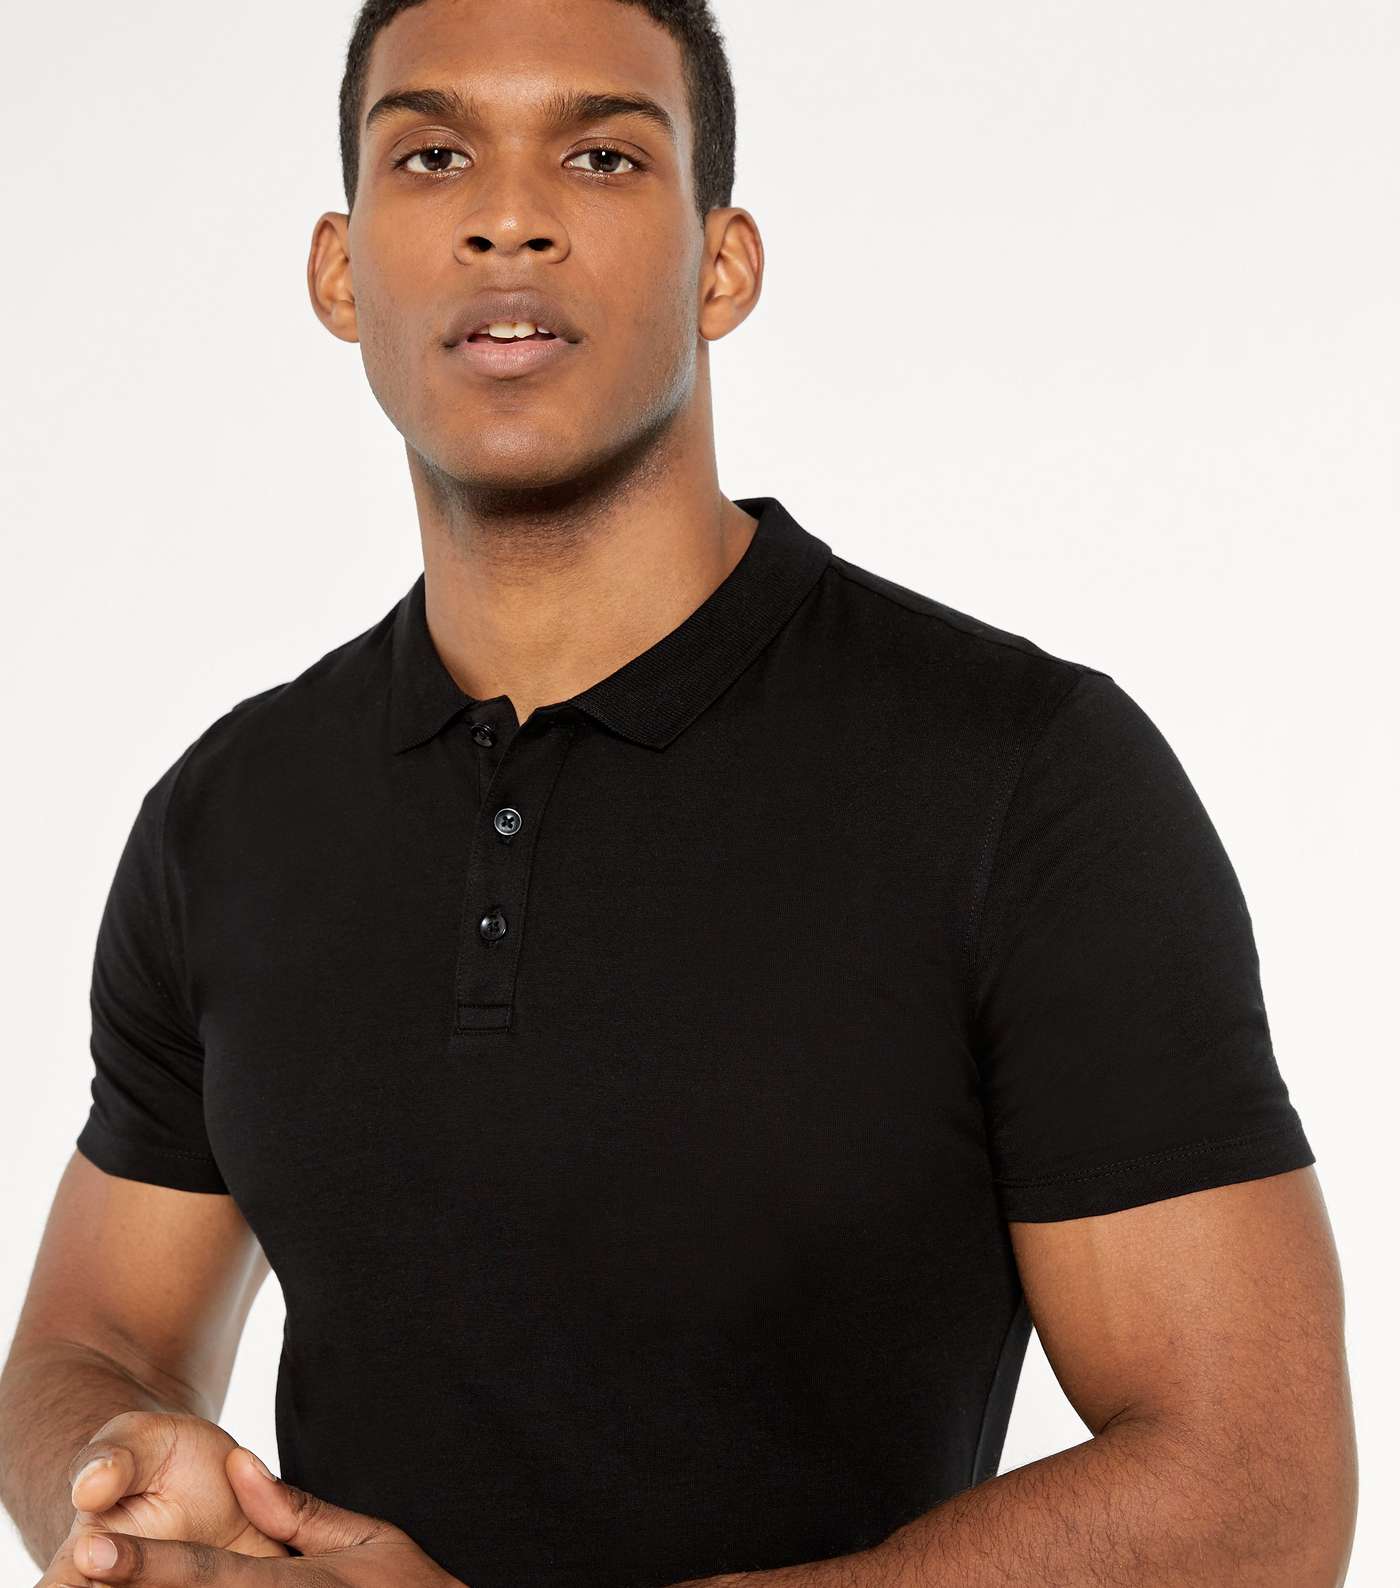 Black Muscle Fit Polo Shirt Image 3